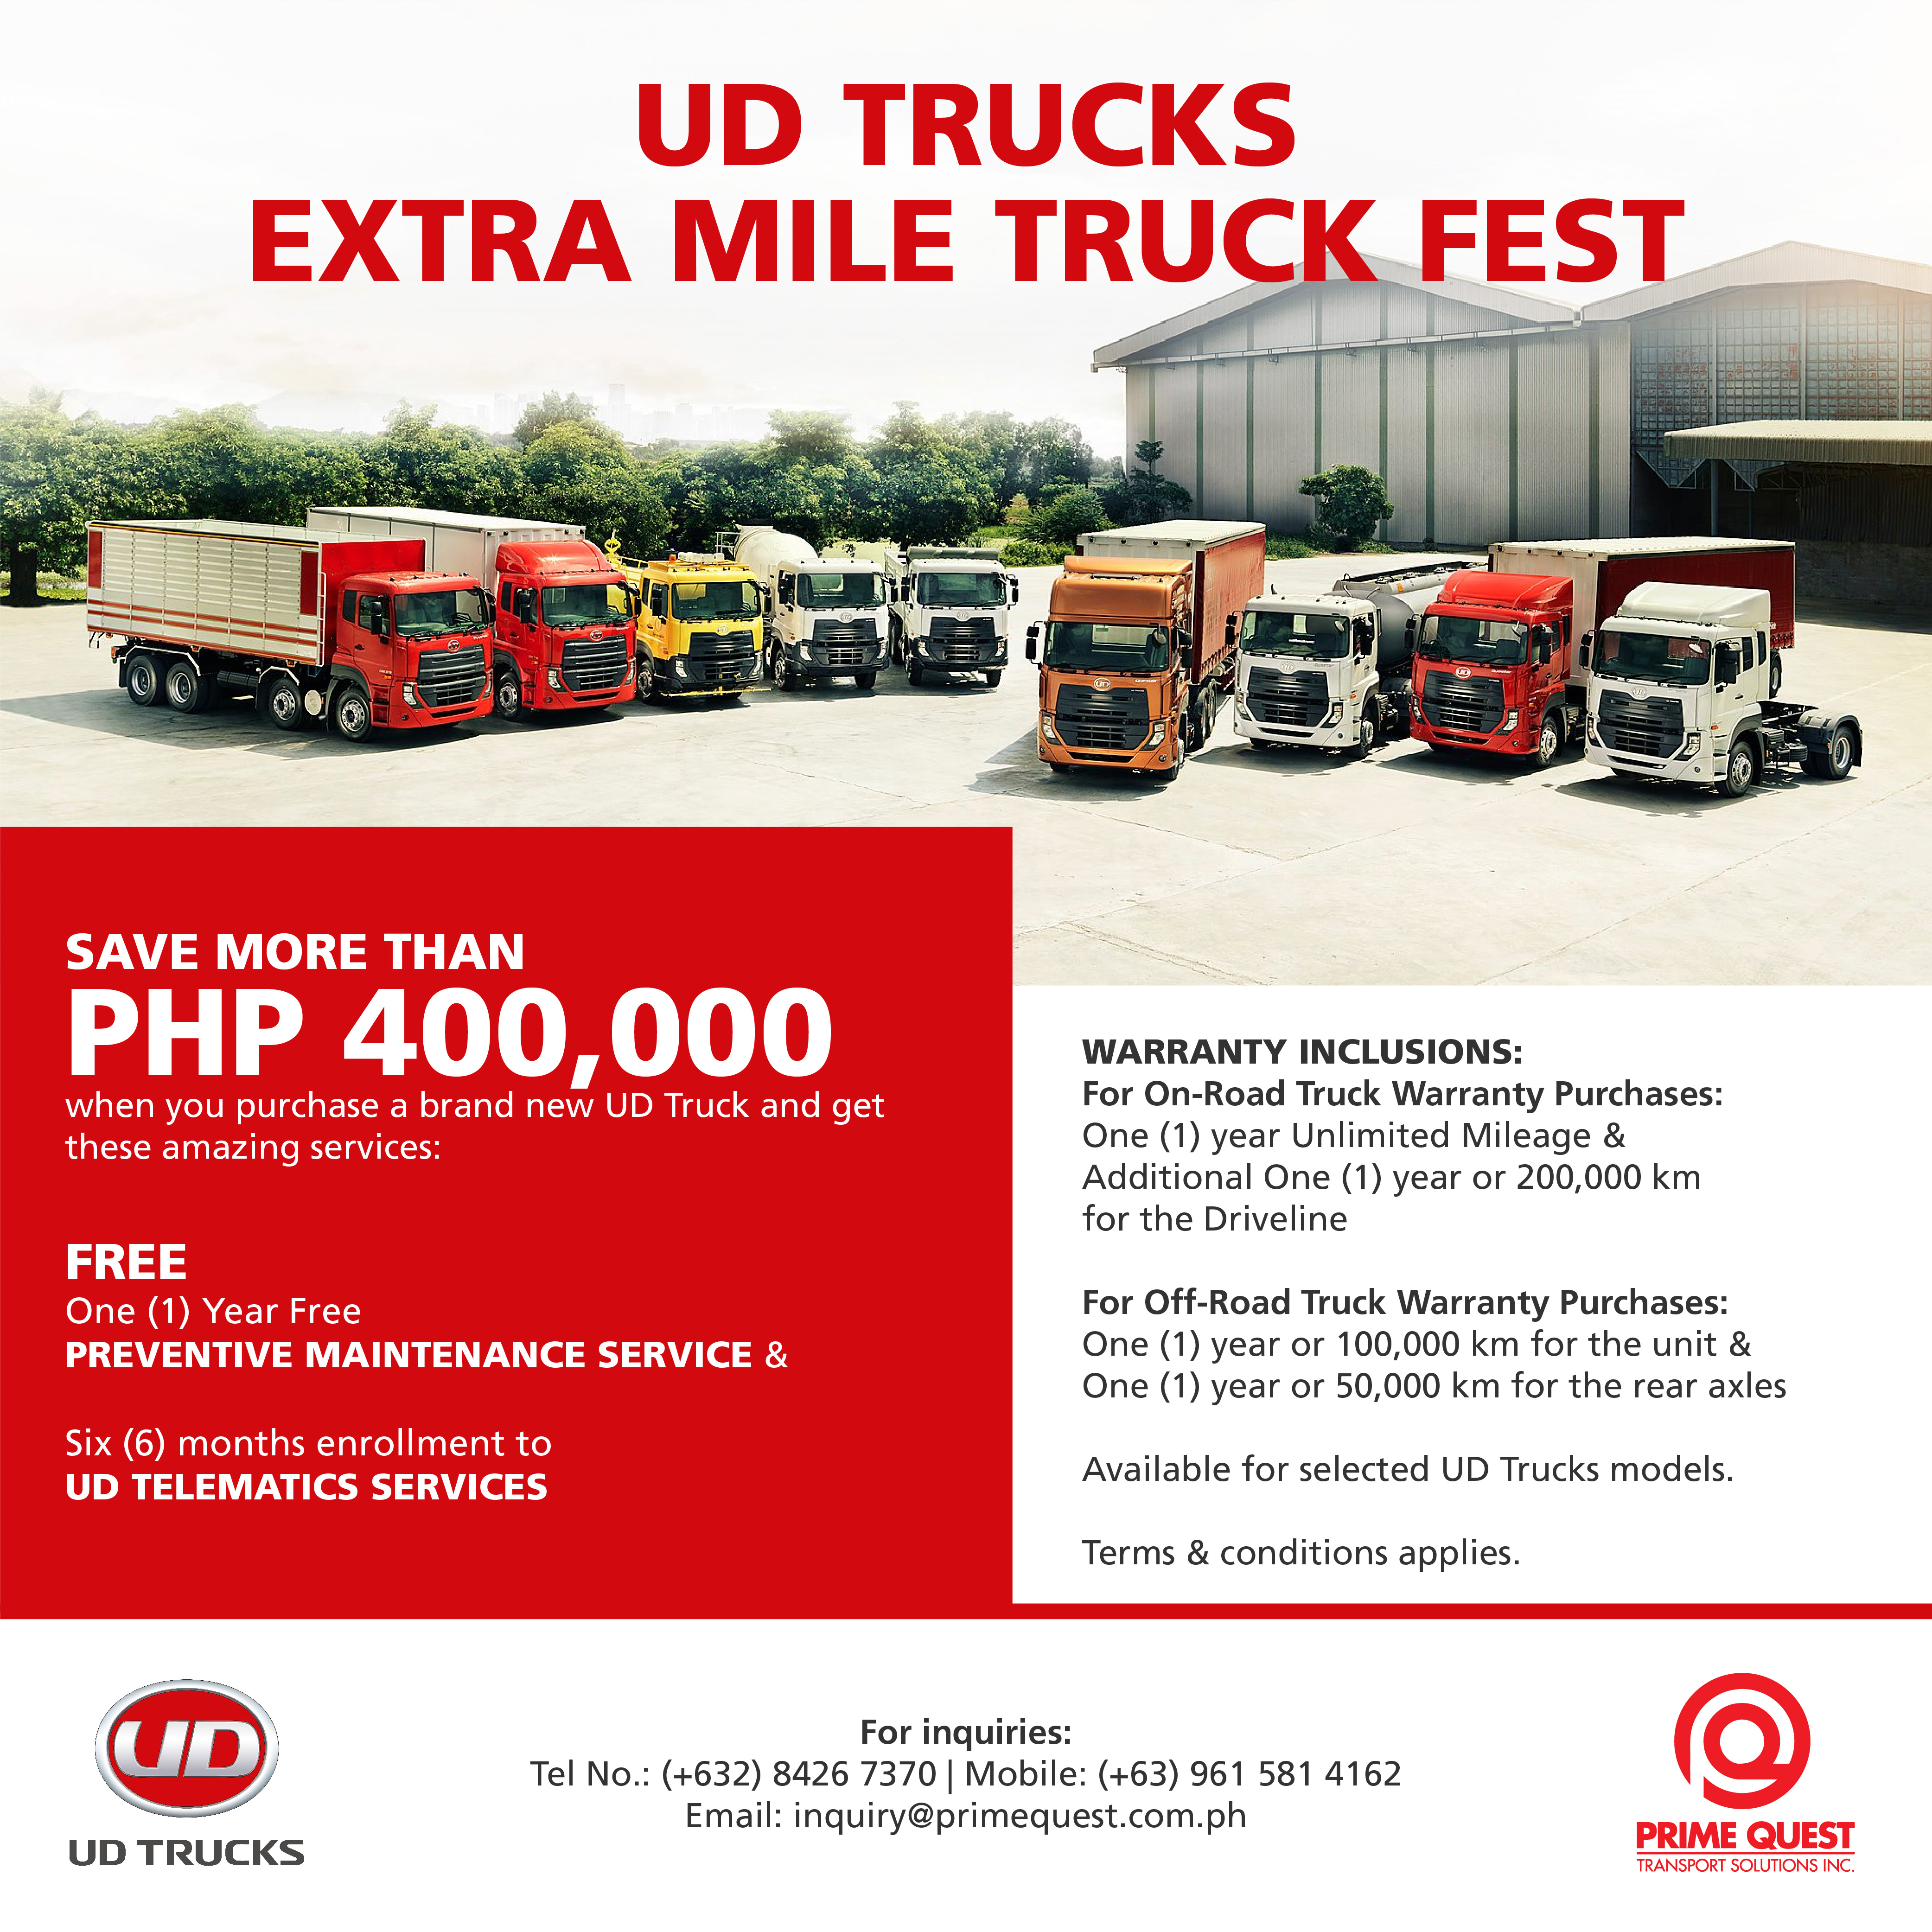 Maximize Efficiency and Productivity with UD Trucks Extra Mile Truck